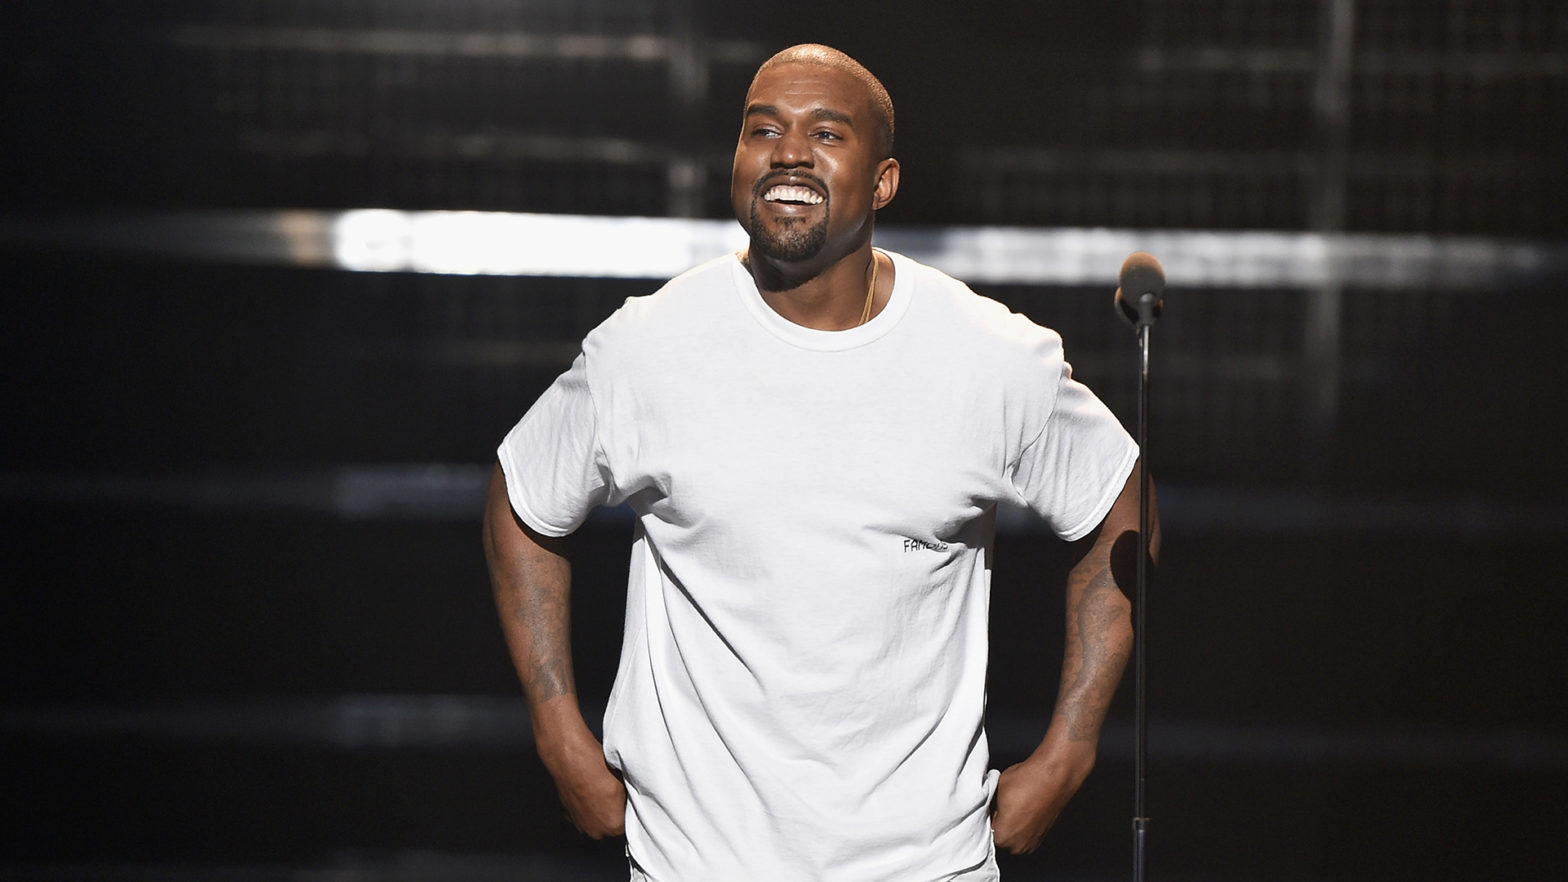 Kanye West’s ‘Donda’ Scores Spotify's Second-Biggest Debut With Nearly 100 Million Streams In 24 Hours